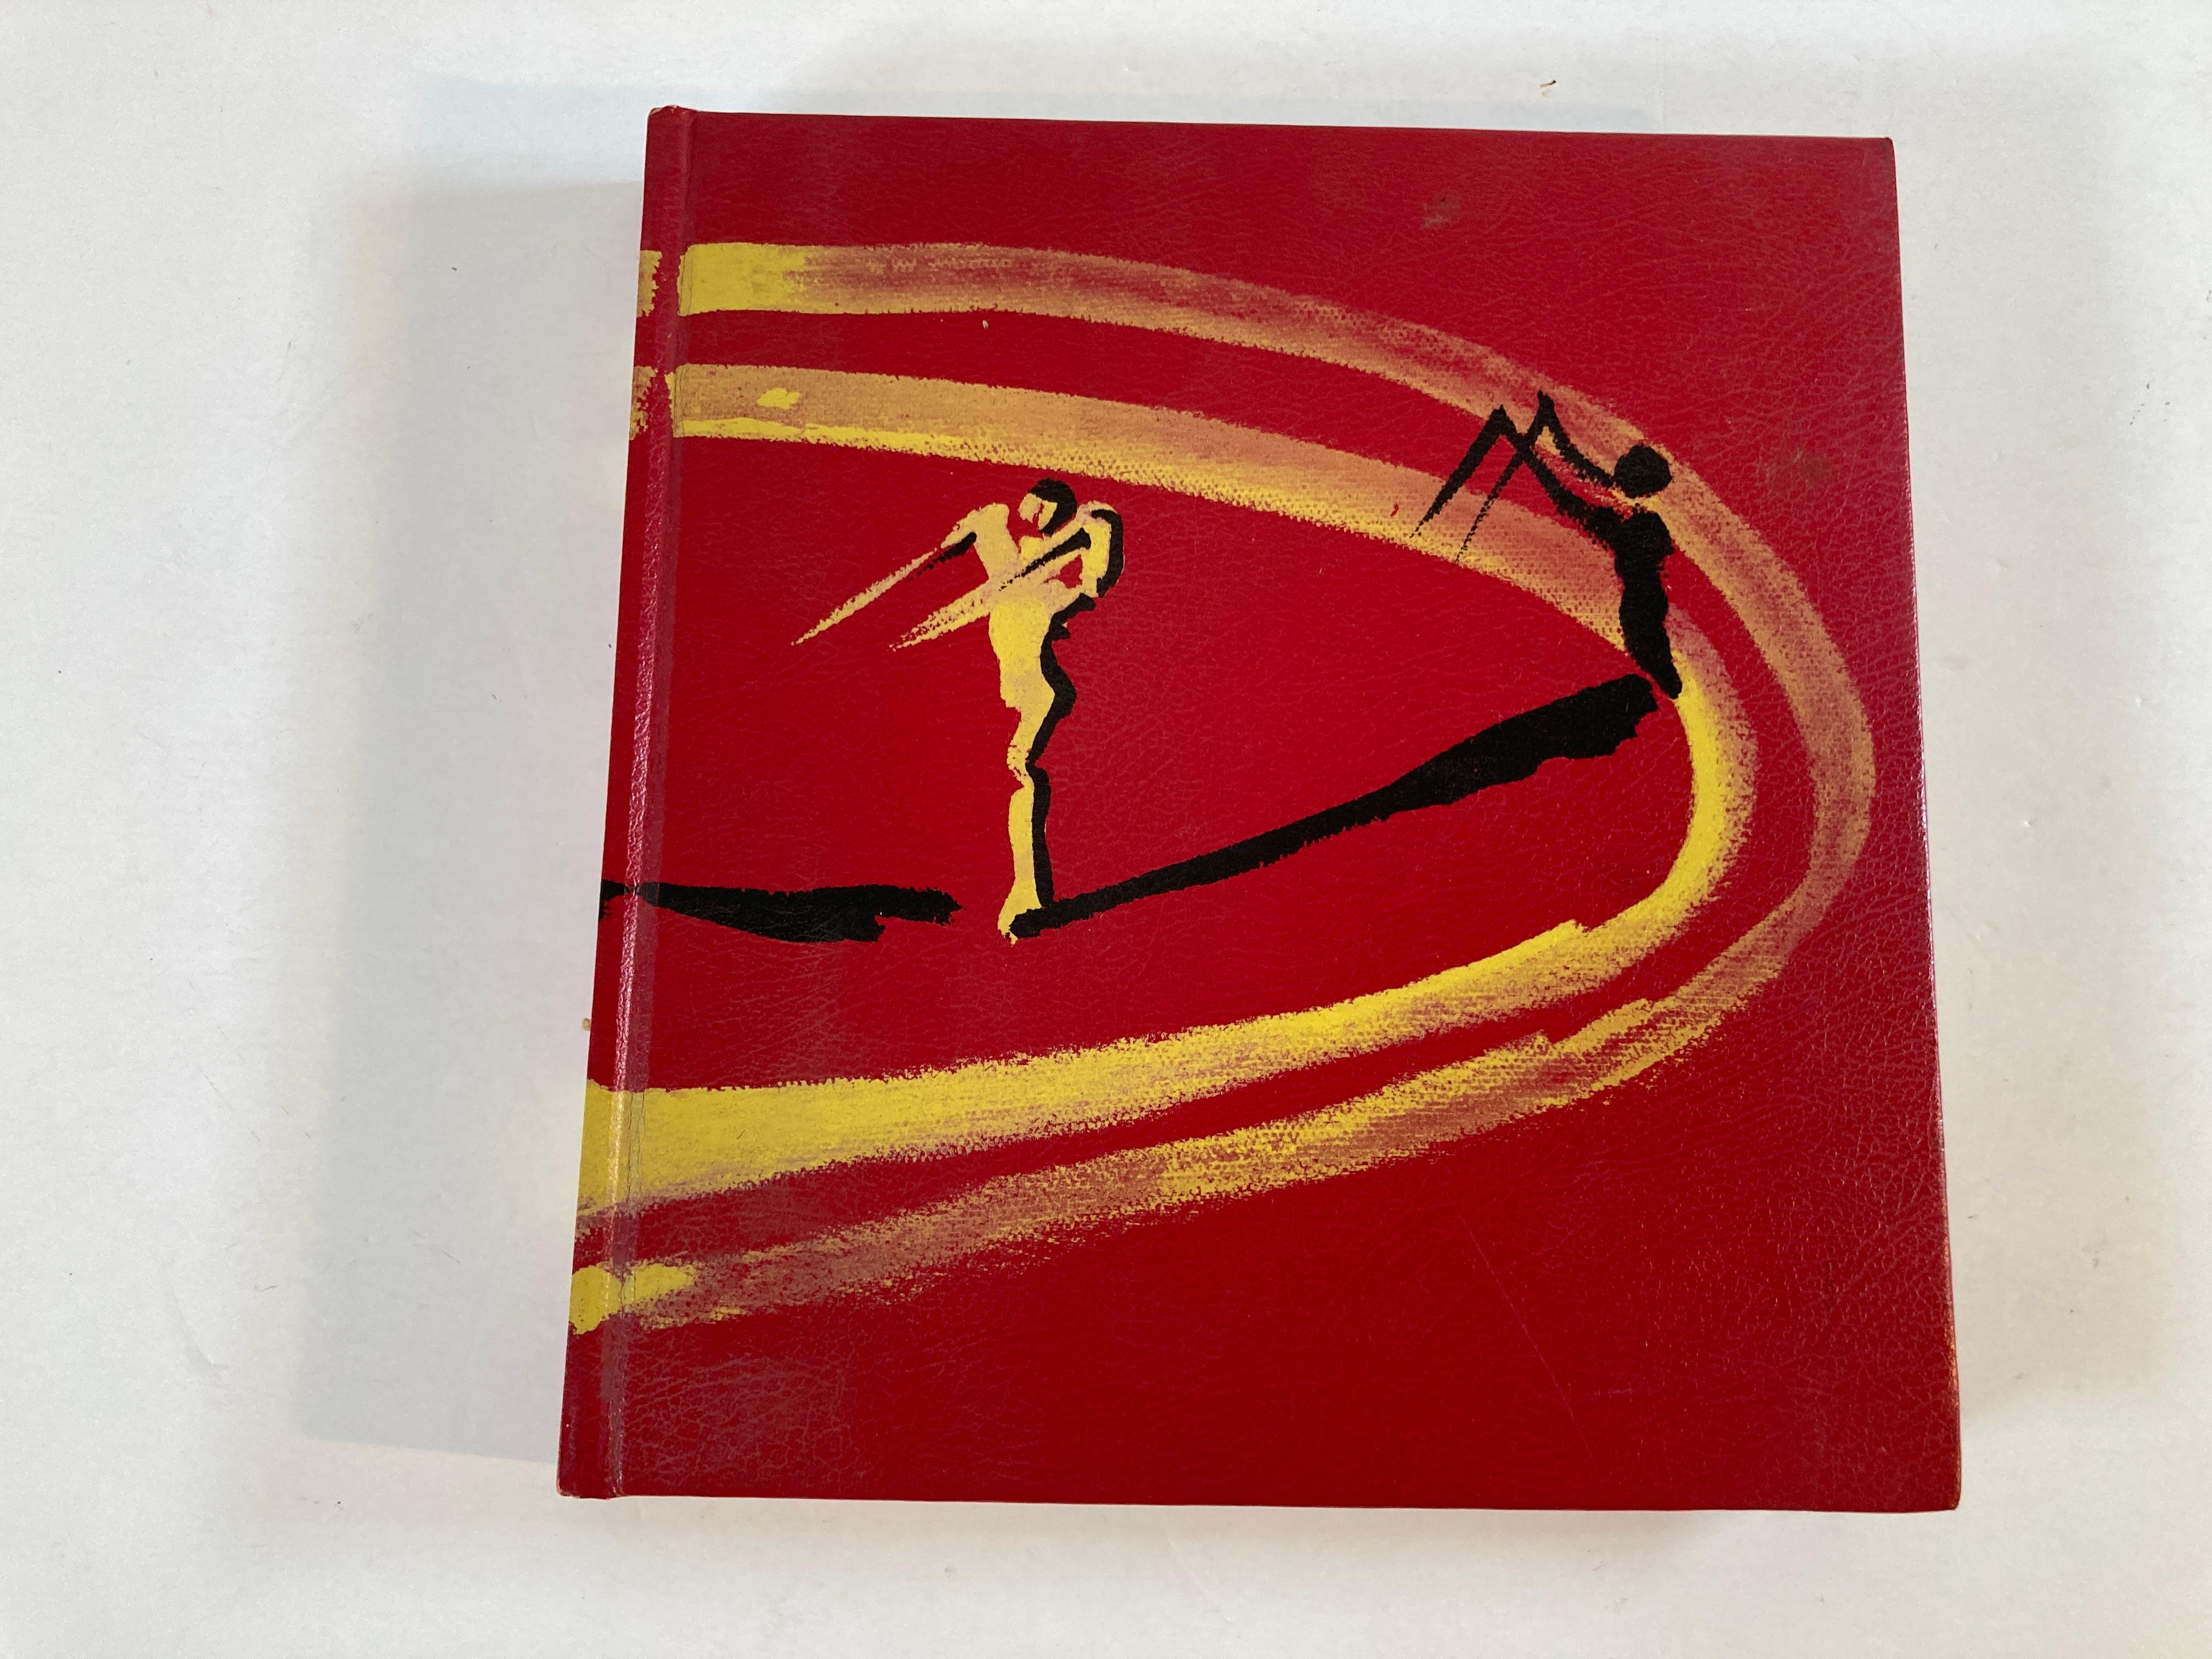 Dali by Romero, Luis Biography of Salvador Dali. by Luis Romero 
Published by Ediciones Poligrafa, Barcelona, 1975.
1st Edition. Decorated red cloth, to hardcover, 
357p, illustrated, book is mark-free 
1st english edition,
Traces the life and